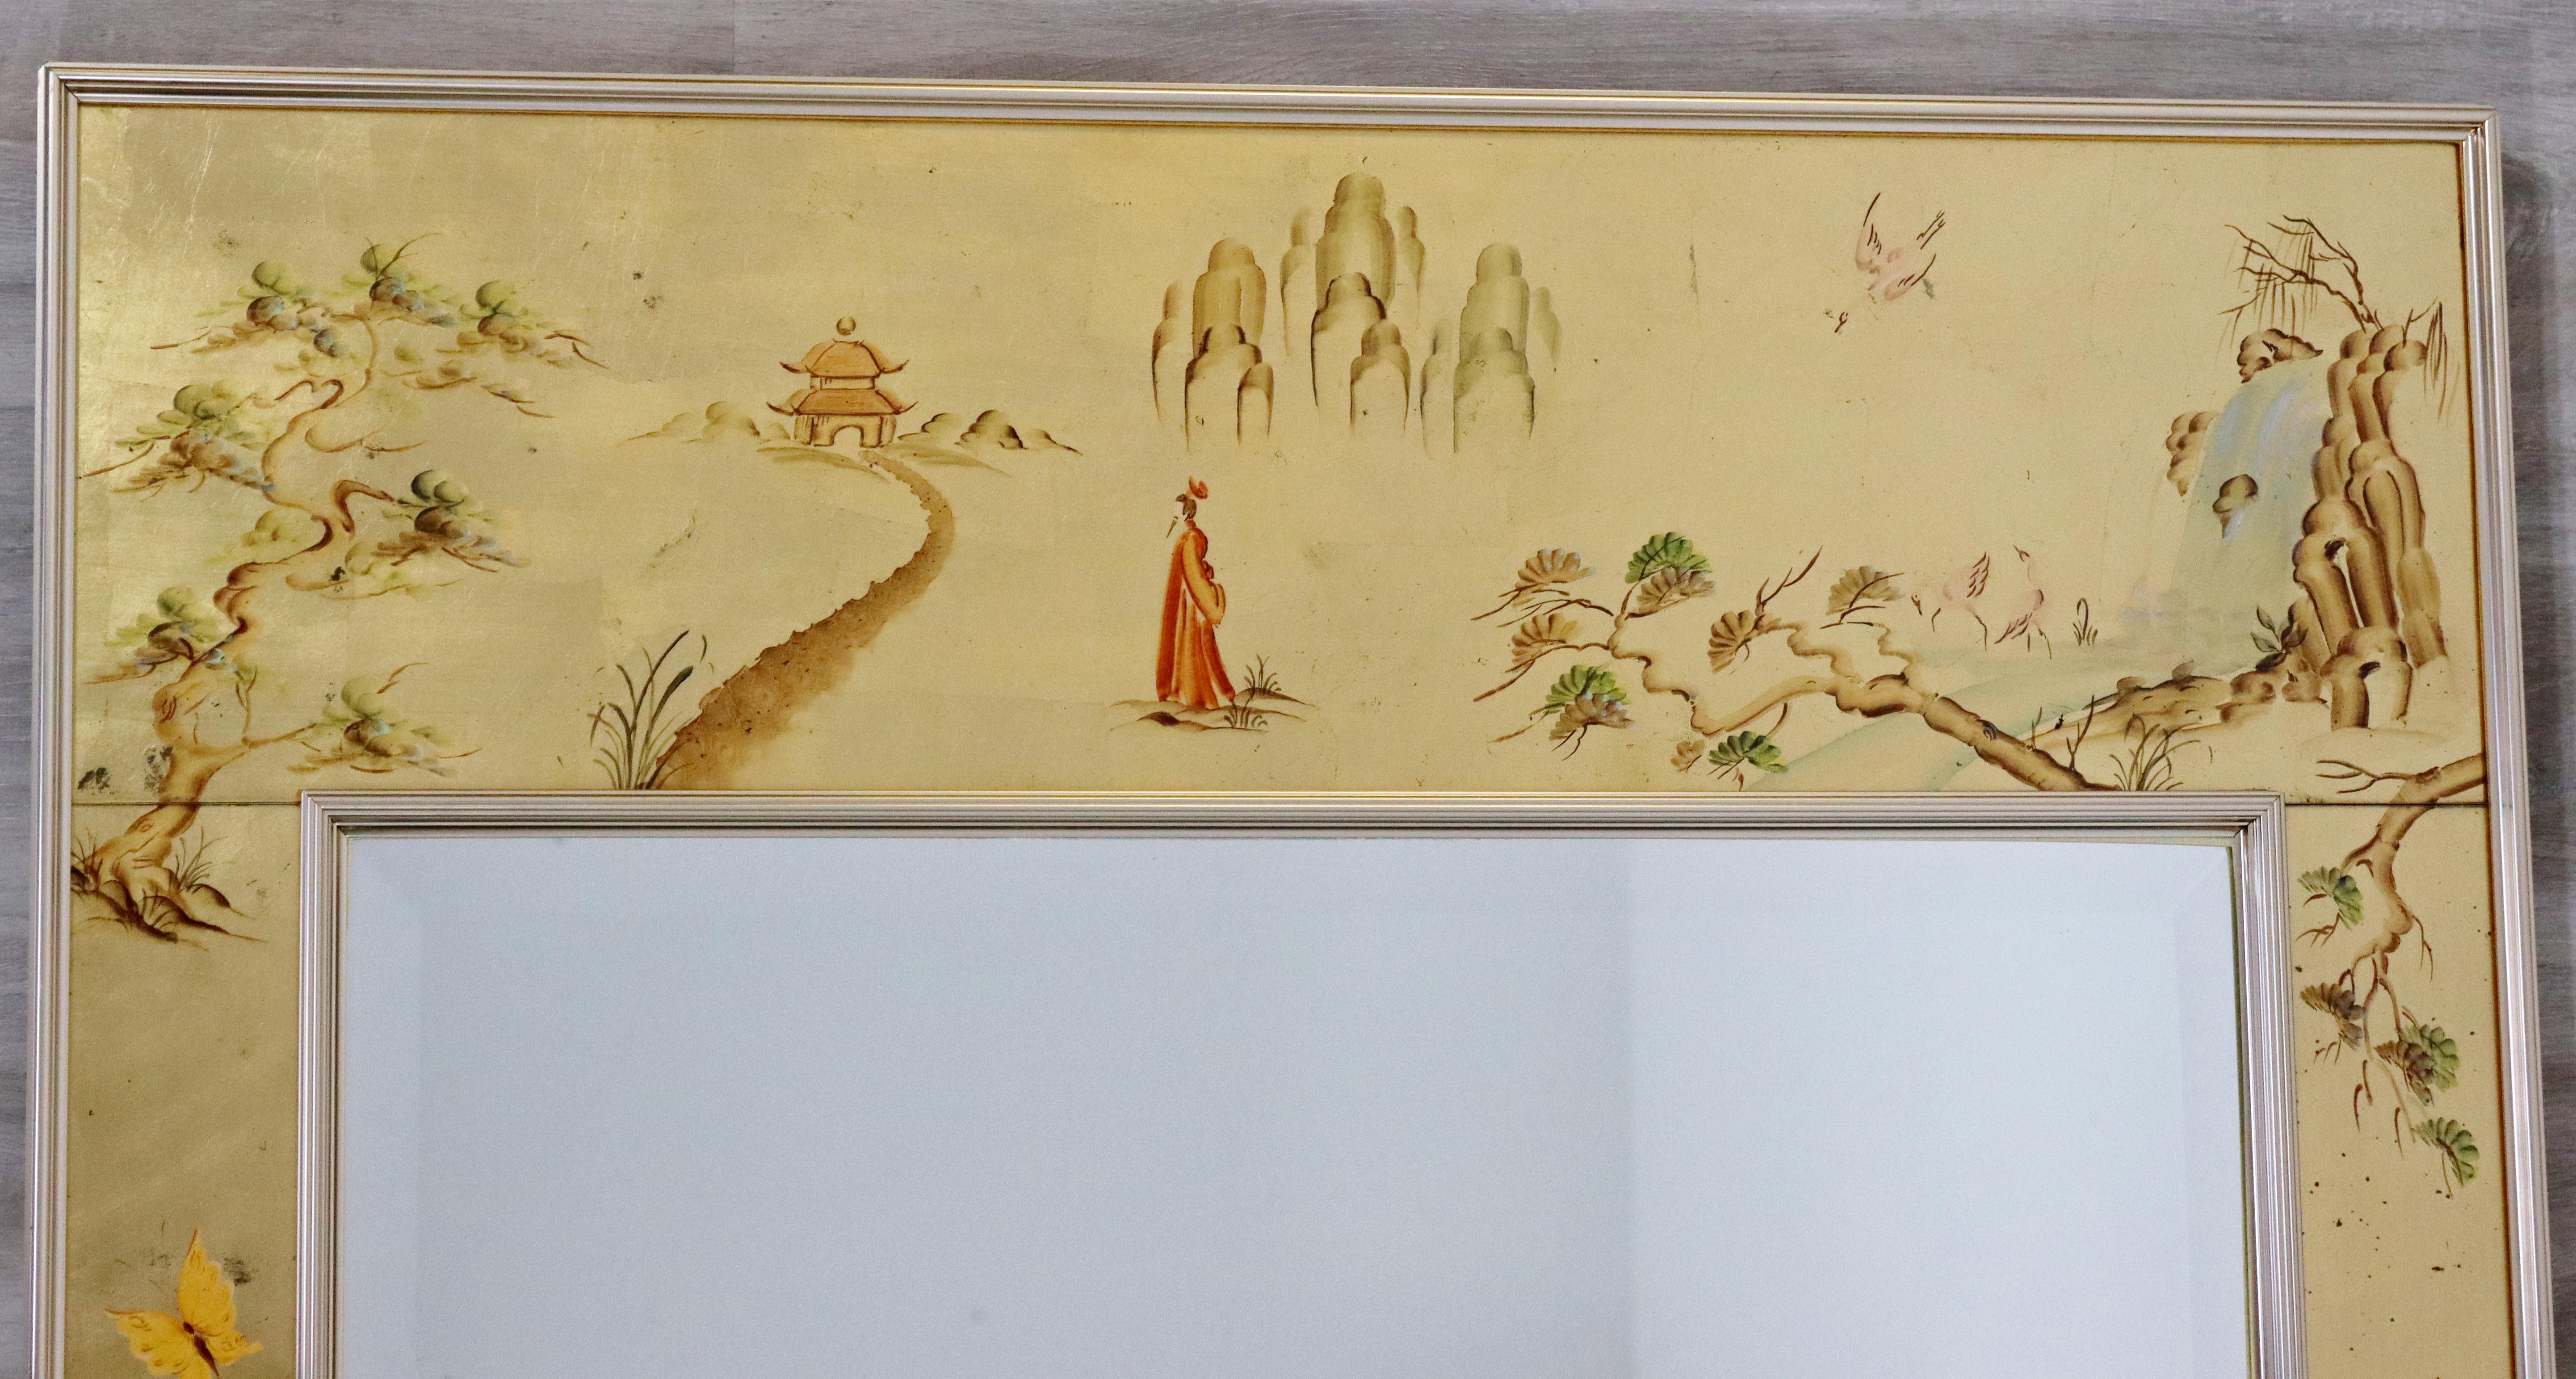 For your consideration is a beautiful, hand painted, chinoiserie Asian style wall mirror, signed J. , dated 1978. In excellent vintage condition. The dimensions are 28.5